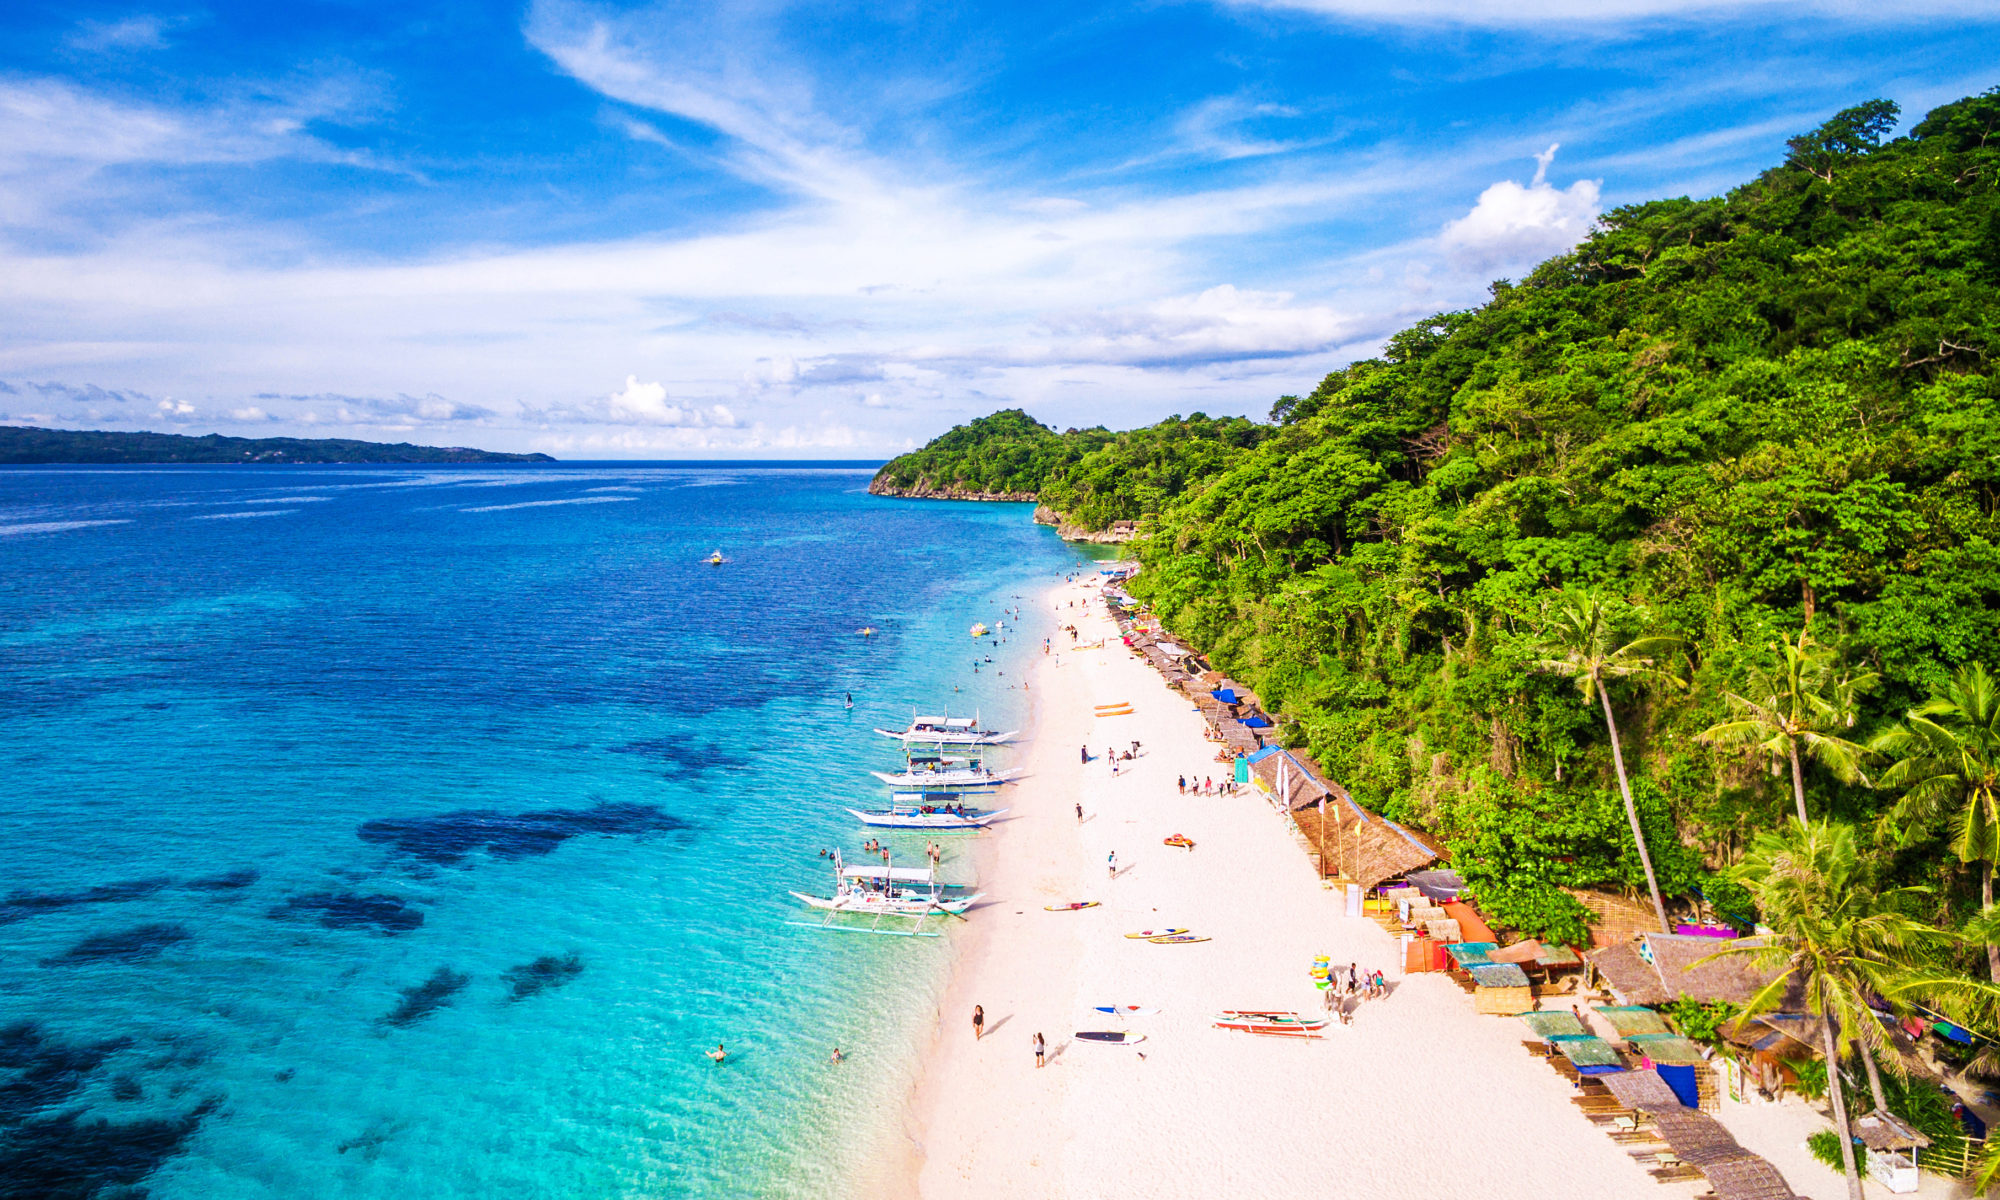 Strained by tourism, Philippines’ once idyllic Boracay checks in for rehab